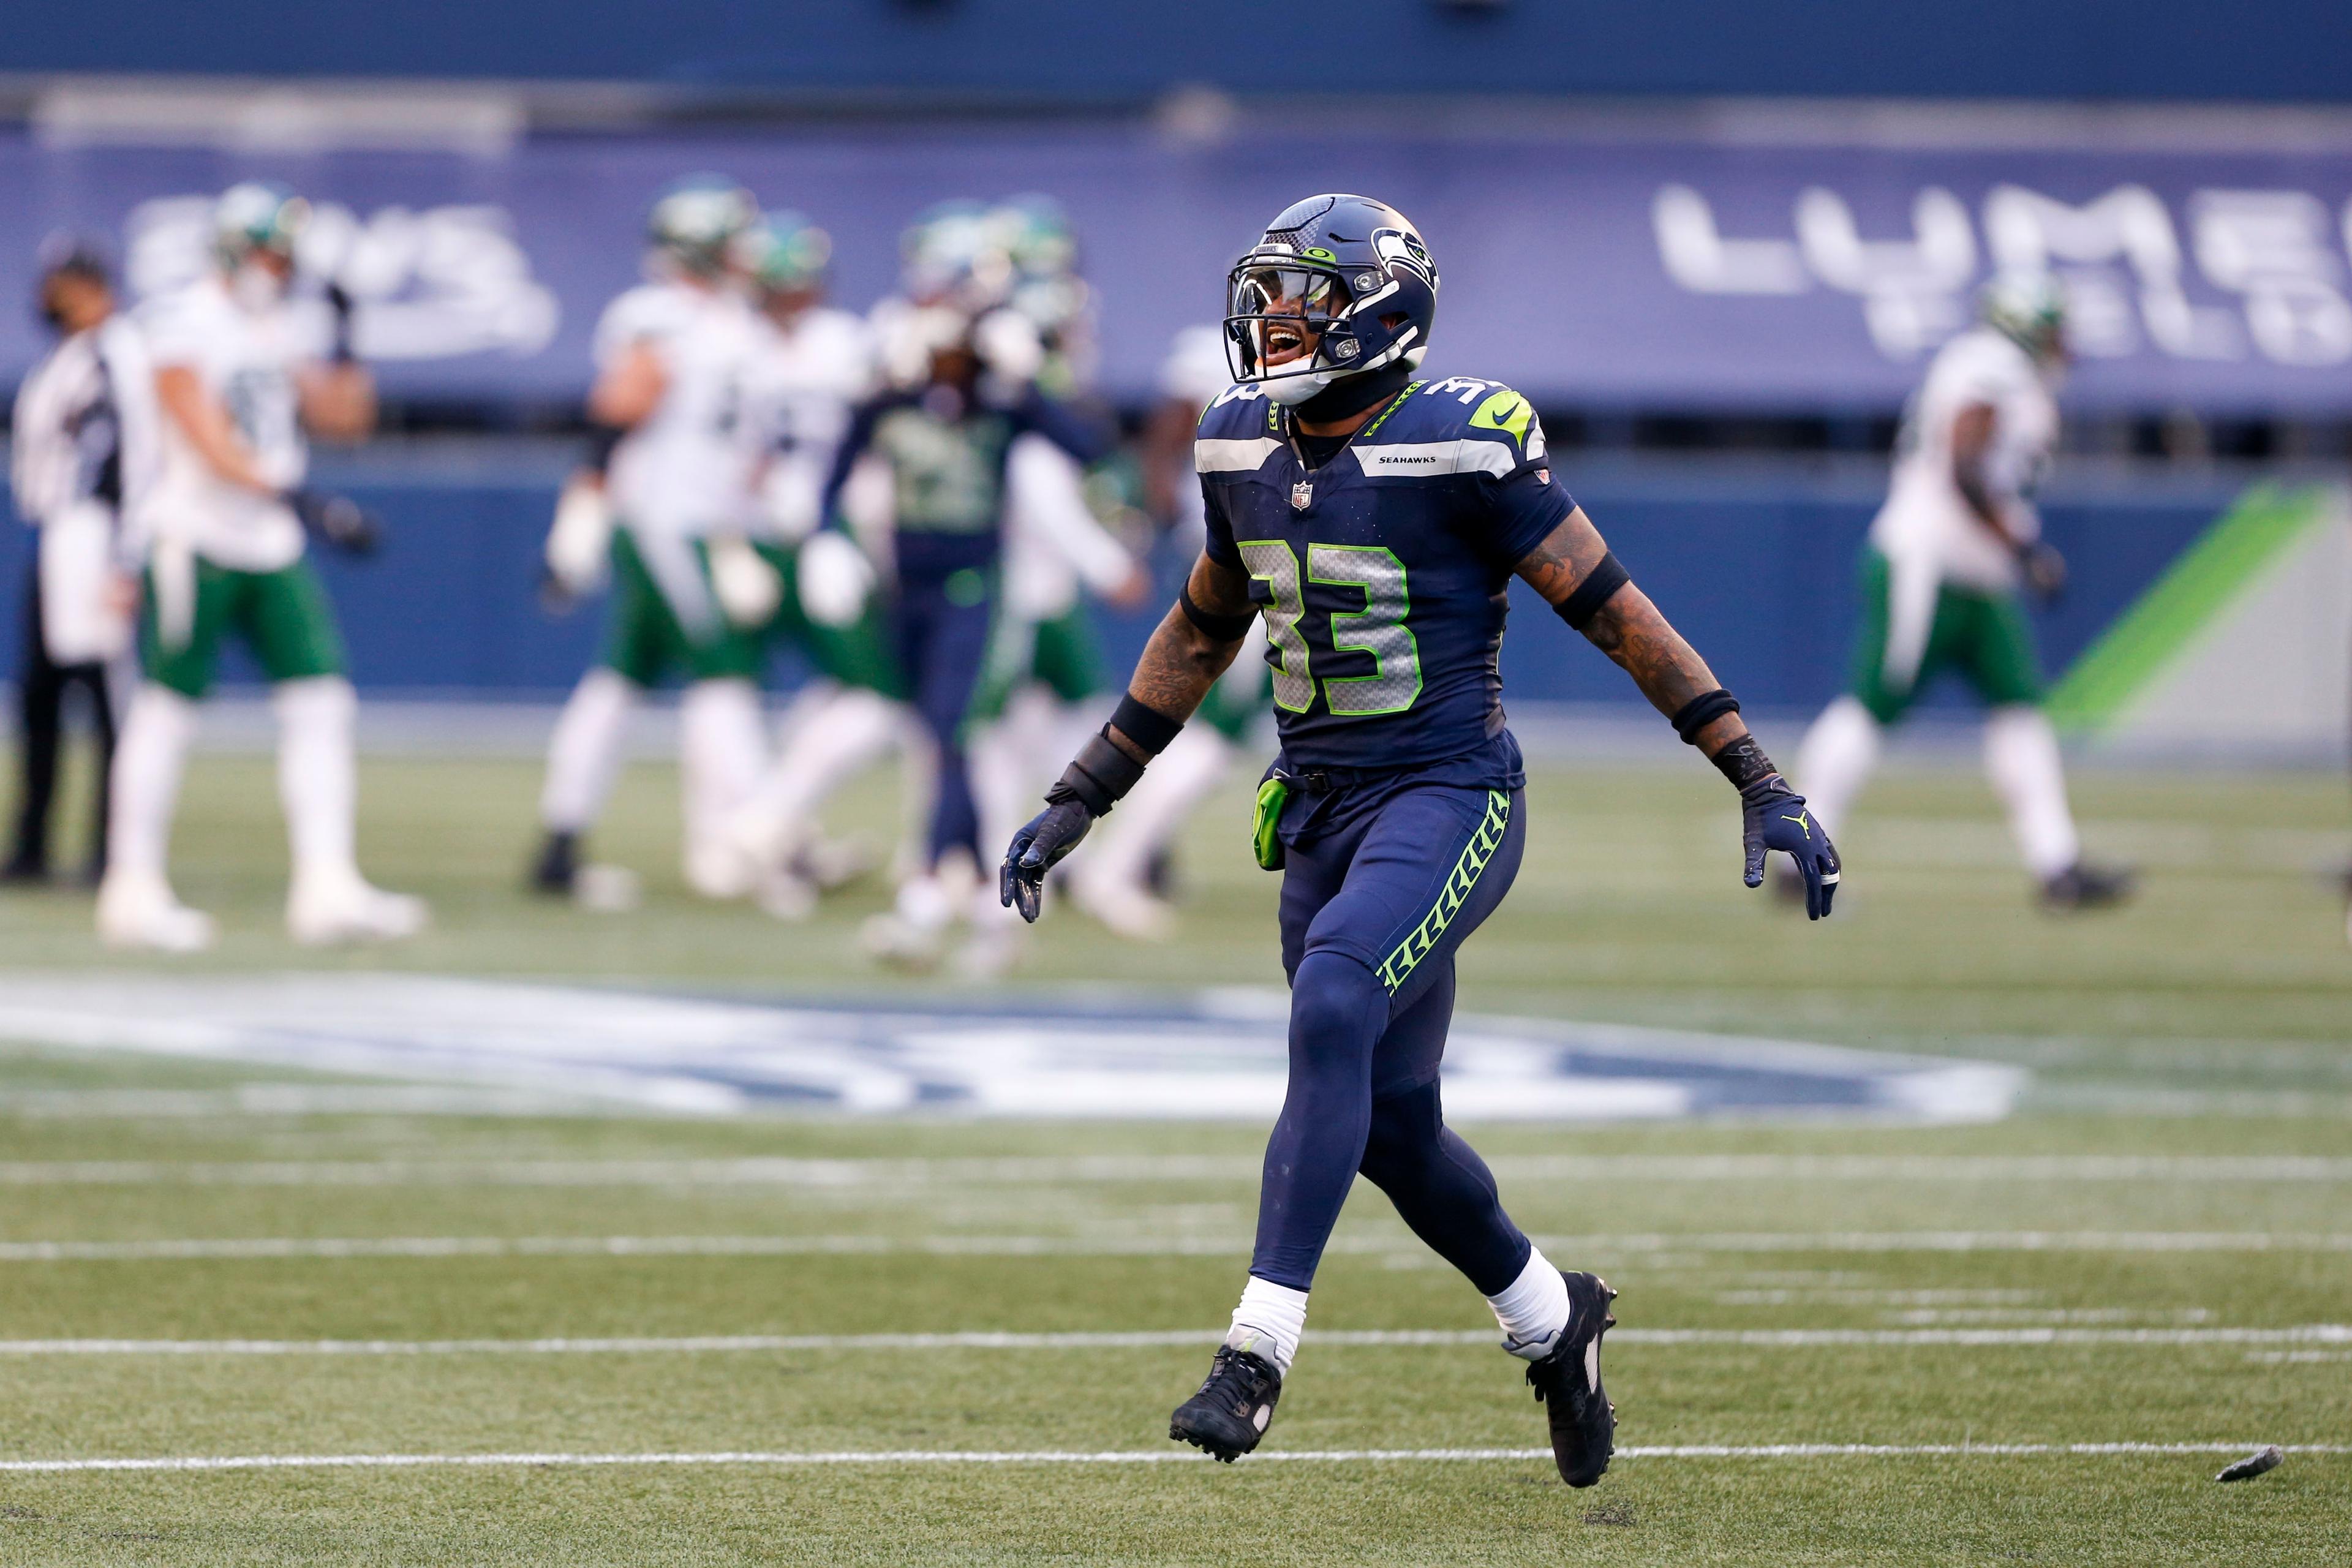 Dec 13, 2020; Seattle, Washington, USA; Seattle Seahawks strong safety Jamal Adams (33) reacts following the a missed field goal attempt by the New York Jets during the second quarter at Lumen Field. Mandatory Credit: Joe Nicholson-USA TODAY Sports / © Joe Nicholson-USA TODAY Sports